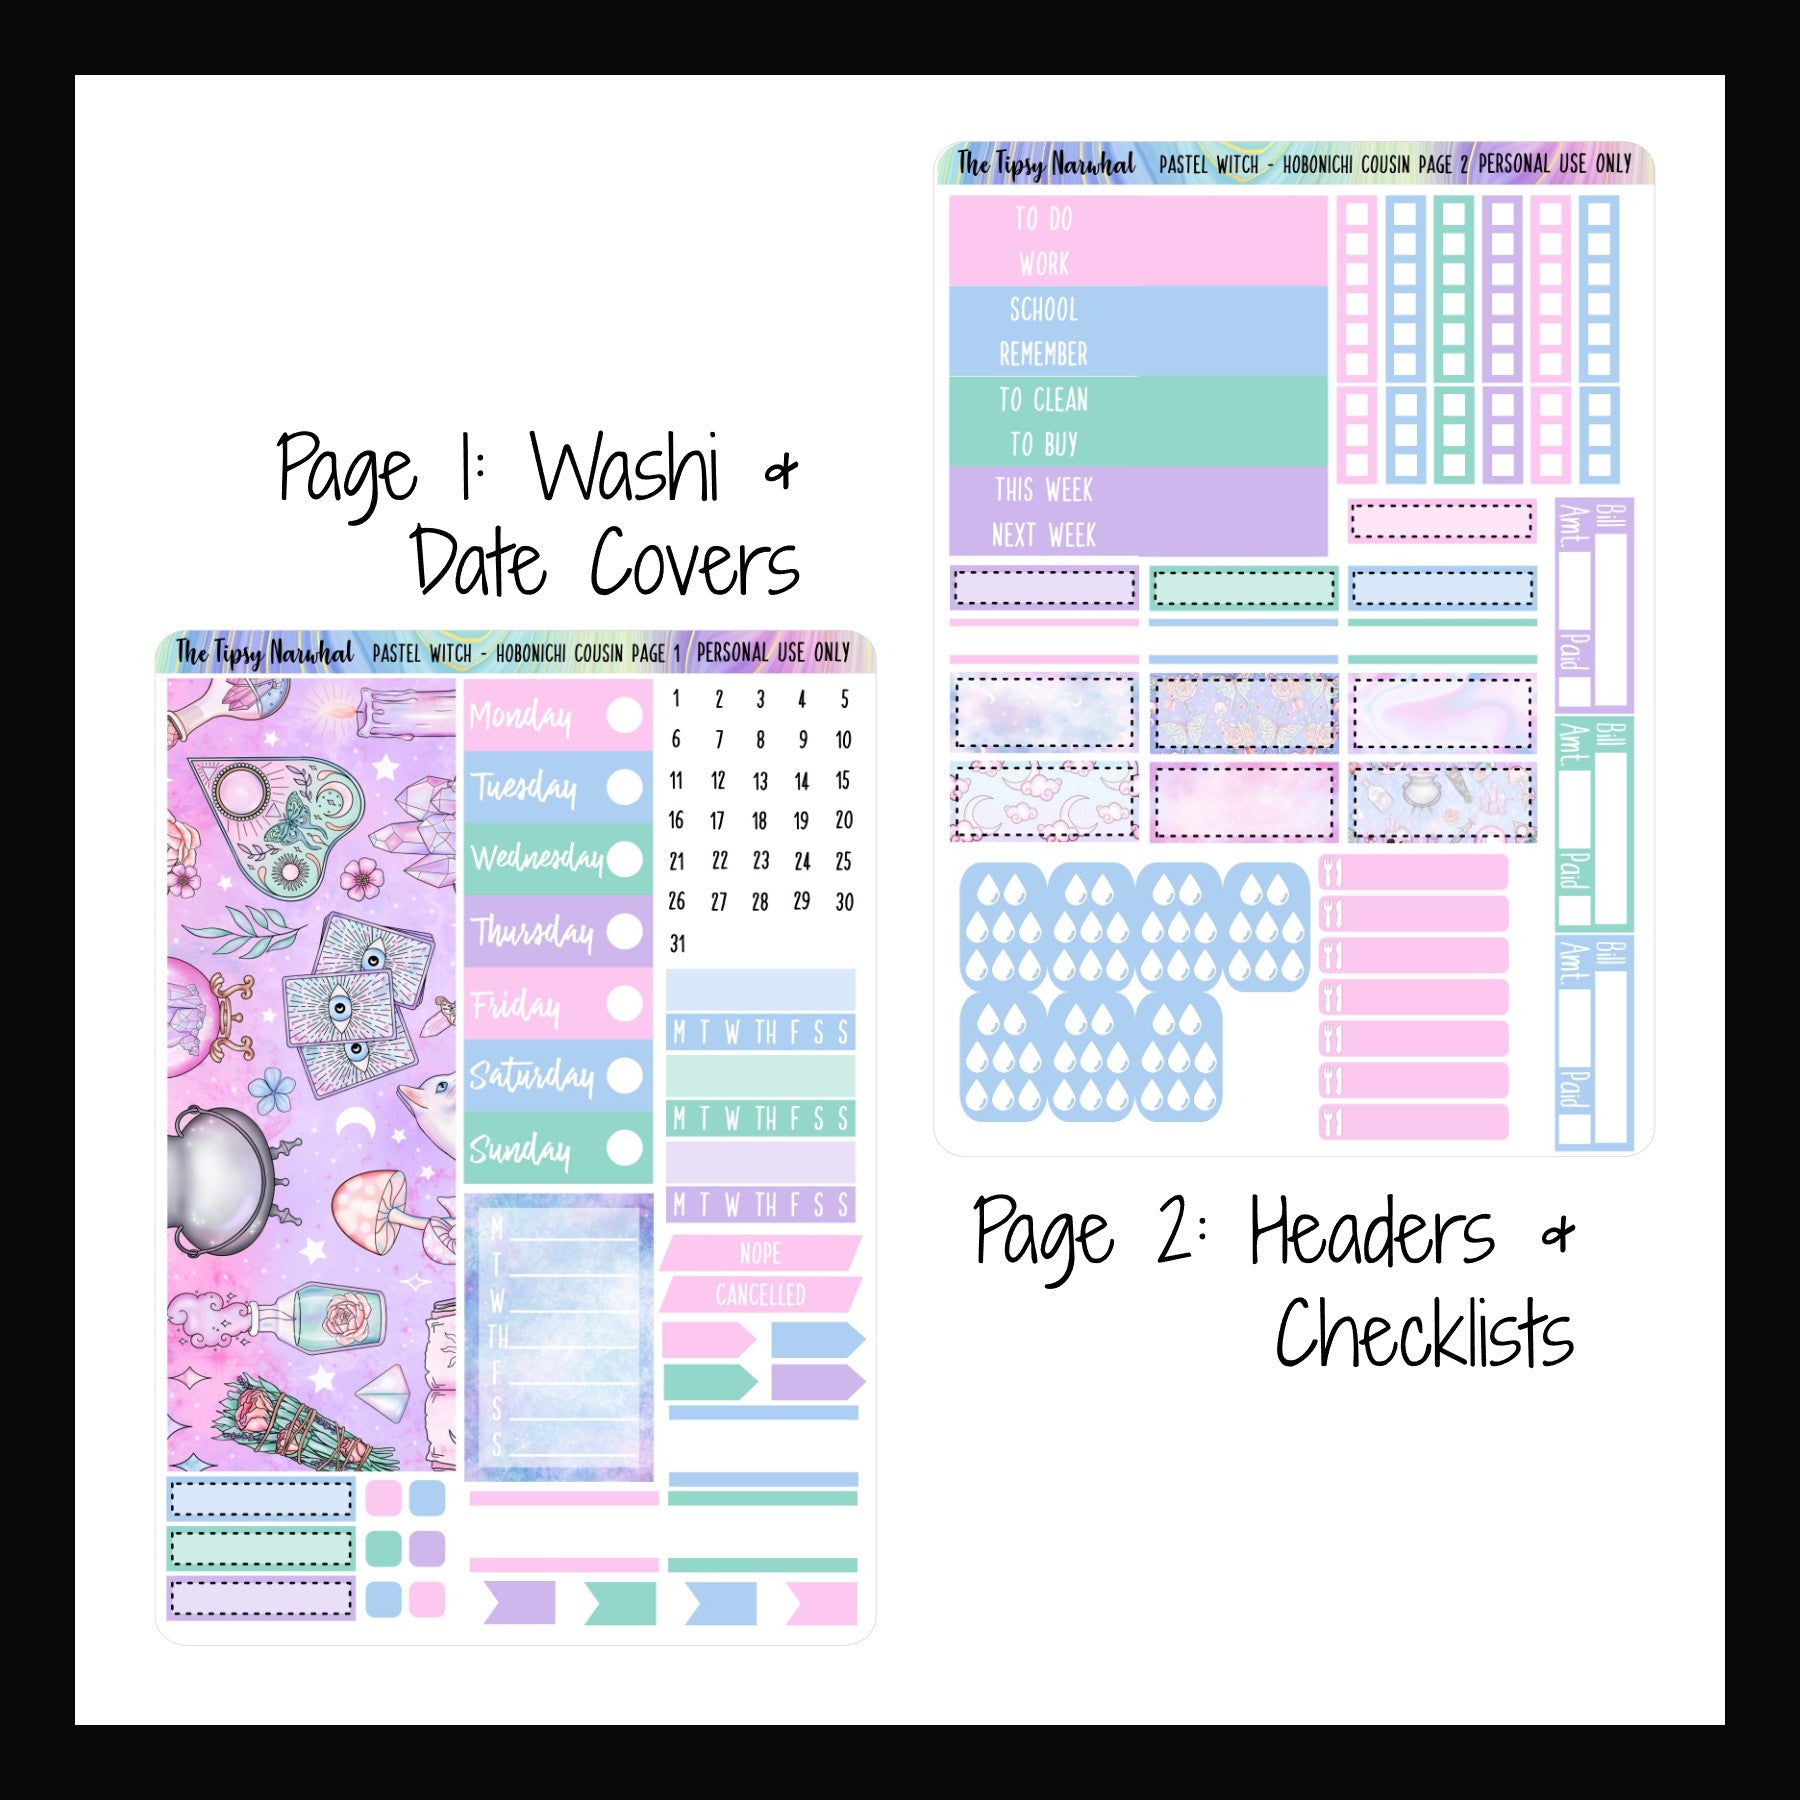 Digital Pastel Witch Hobonichi Cousin Kit Pages 1 and 2. Page 1 features washi strips, date covers, habit trackers, flags, quarter box stickers and a full week sticker.  Page 2 features headers, checklists, quarter box stickers, bill tracking, water tracking and meal tracking stickers.